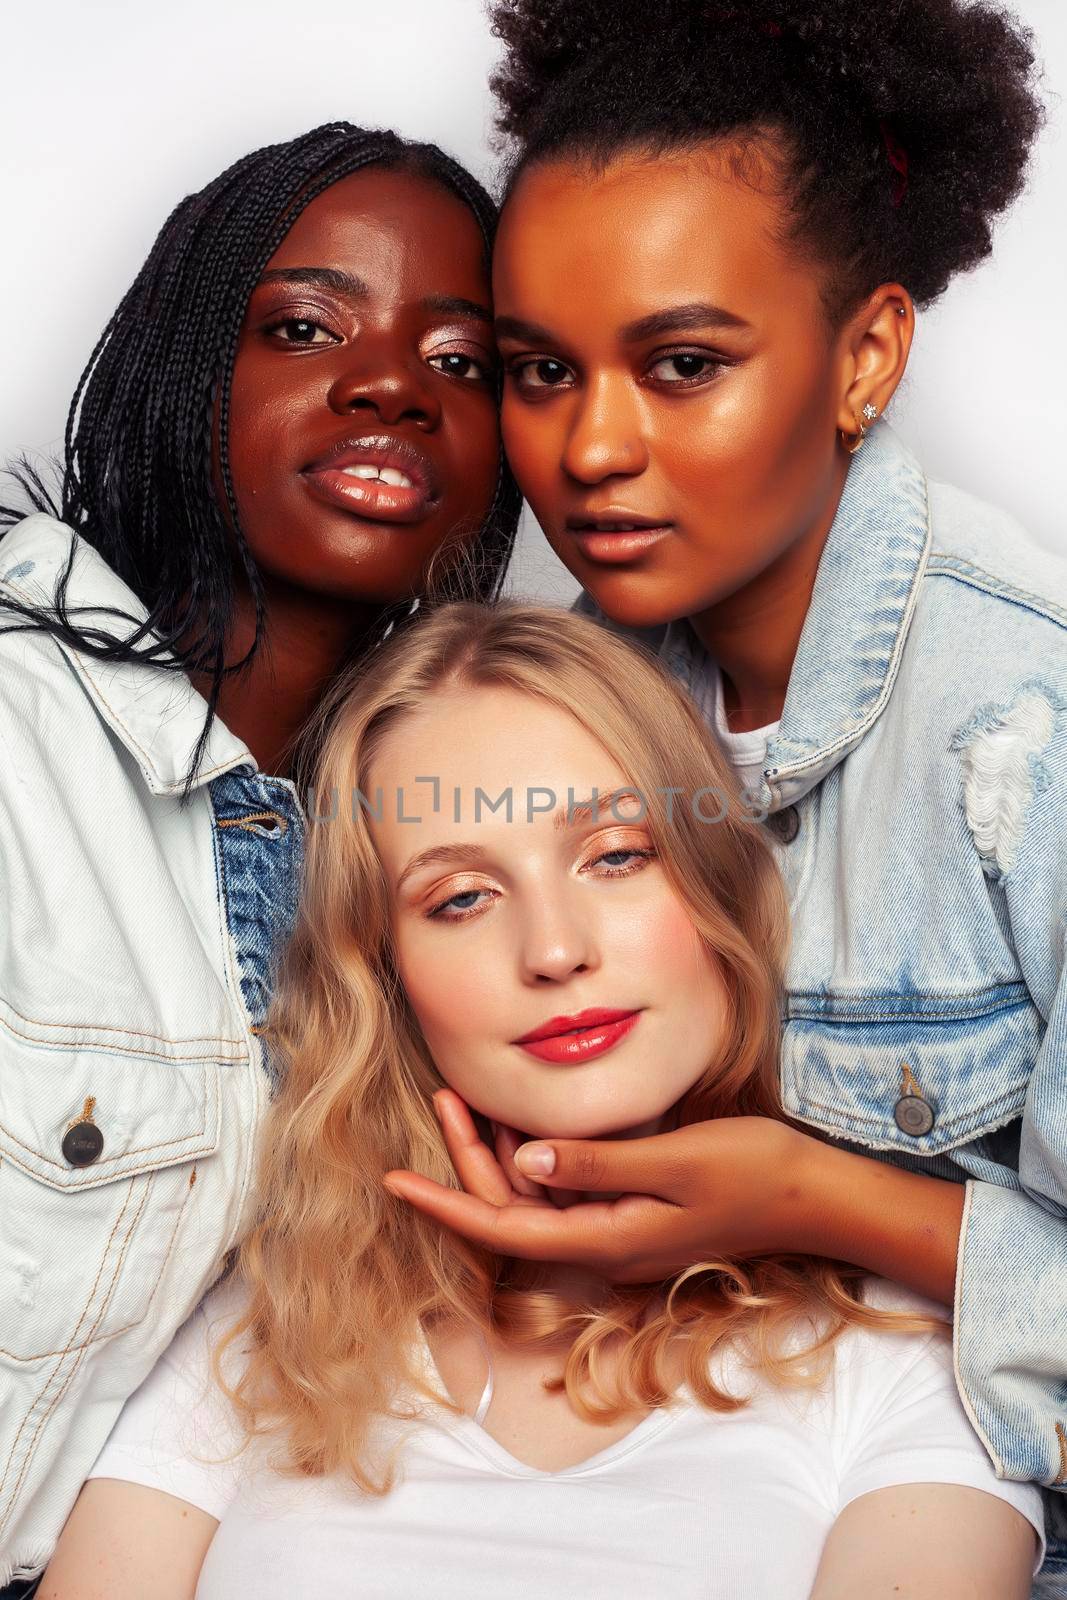 diverse multi nation girls group, teenage friends company cheerful having fun, happy smiling, cute posing isolated on white background, lifestyle people concept, african-american and caucasian close up